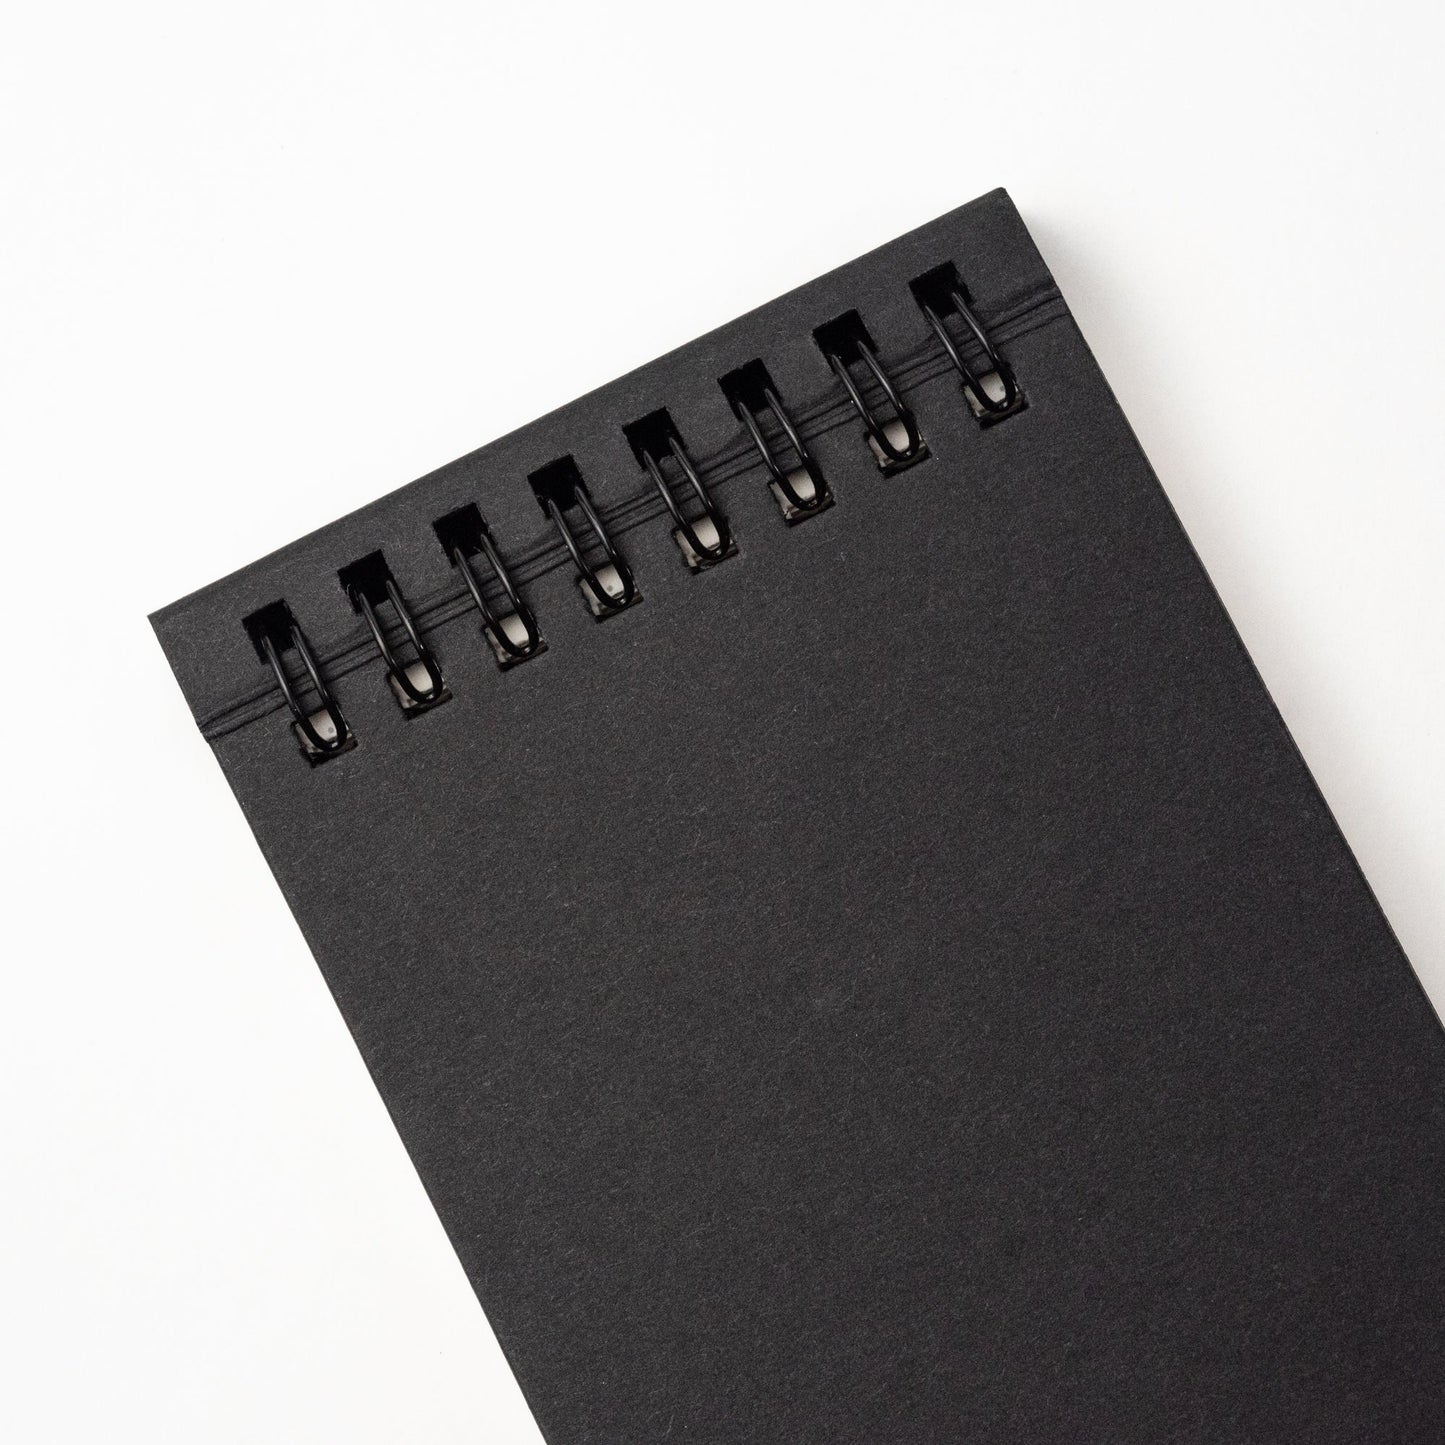 Blackwing Reporter Pads - Blank - Set of 2